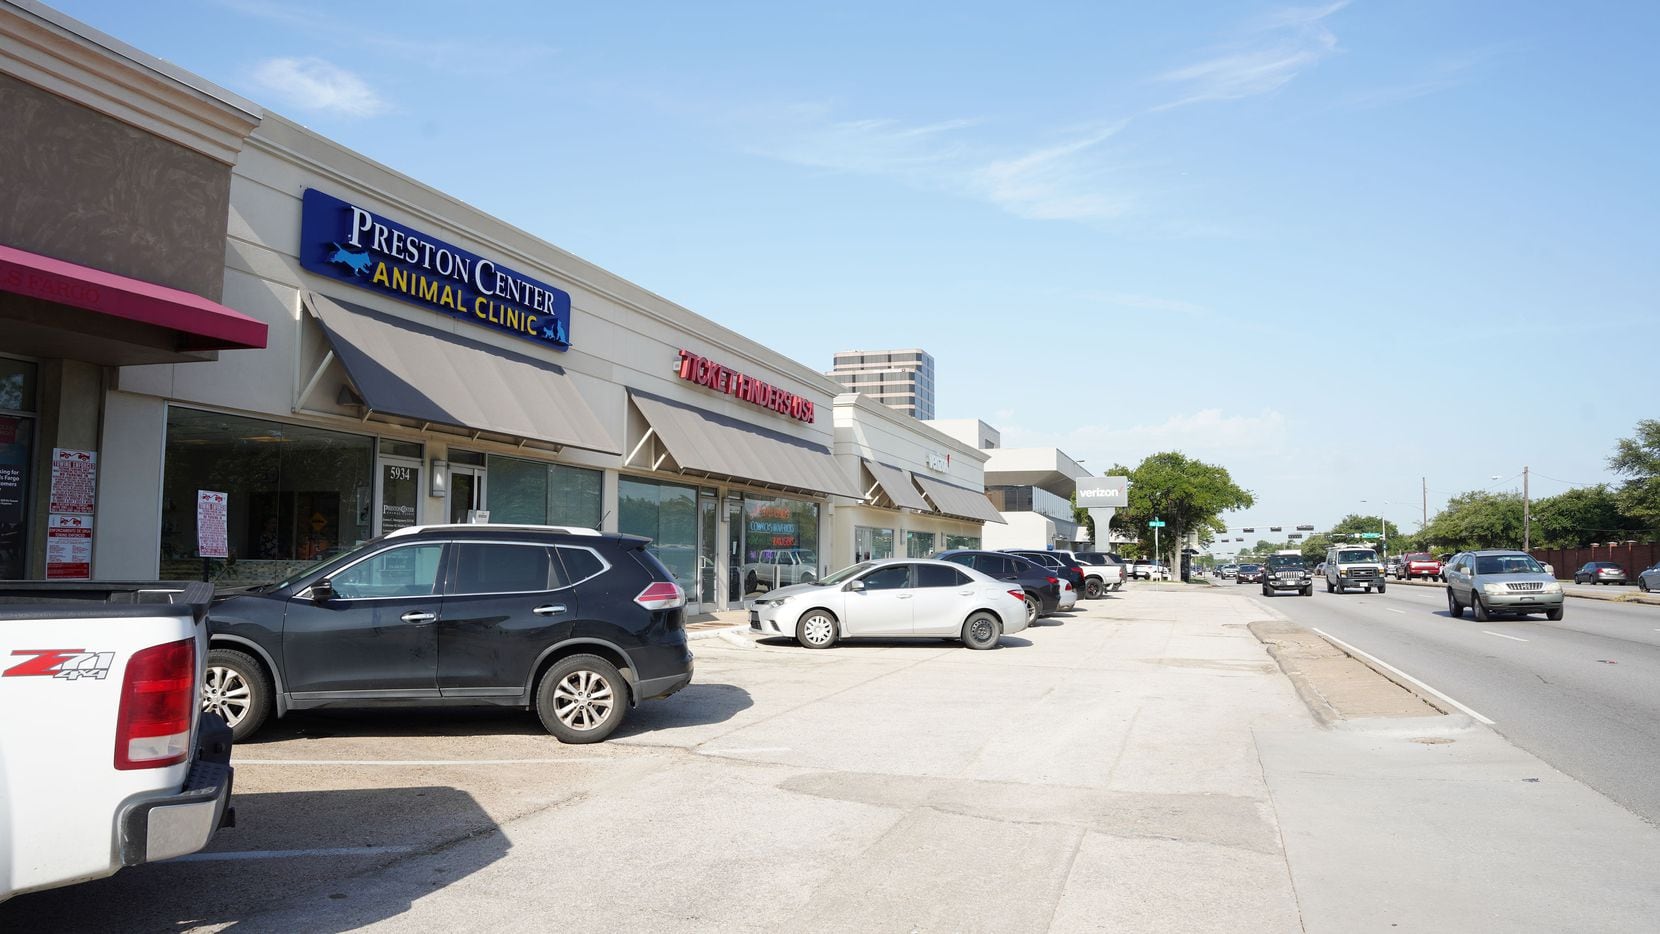 The retail strip is on Northwest Highway just east of the Dallas North Tollway.